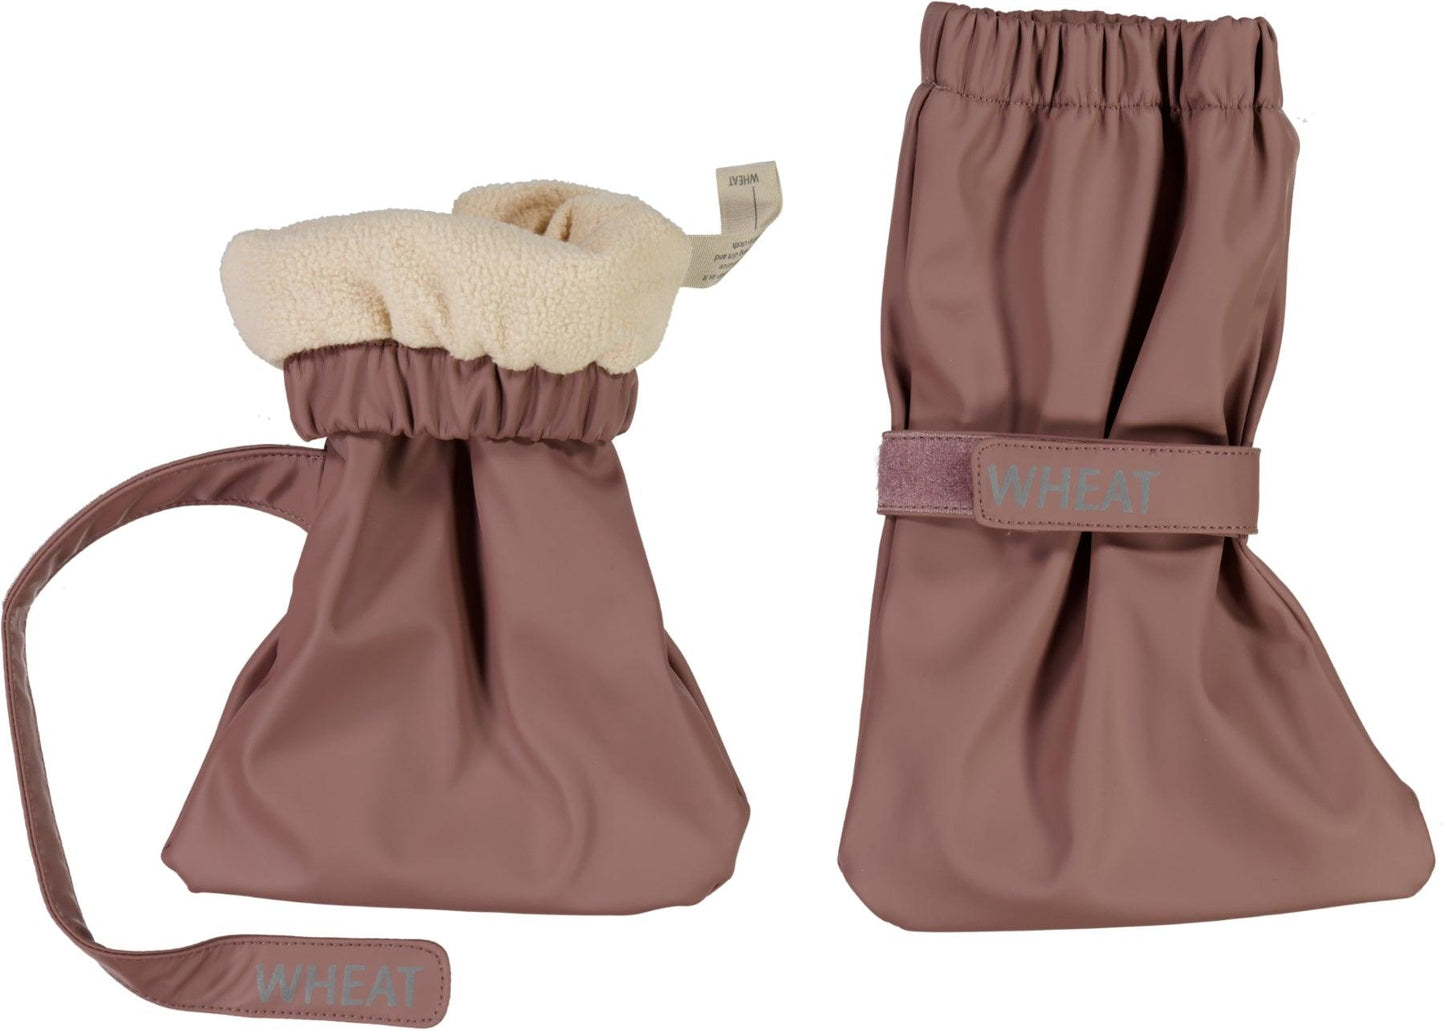 Regen-Booties 'Coco' • Dusty Lilac - The Little One • Family.Concept.Store. 